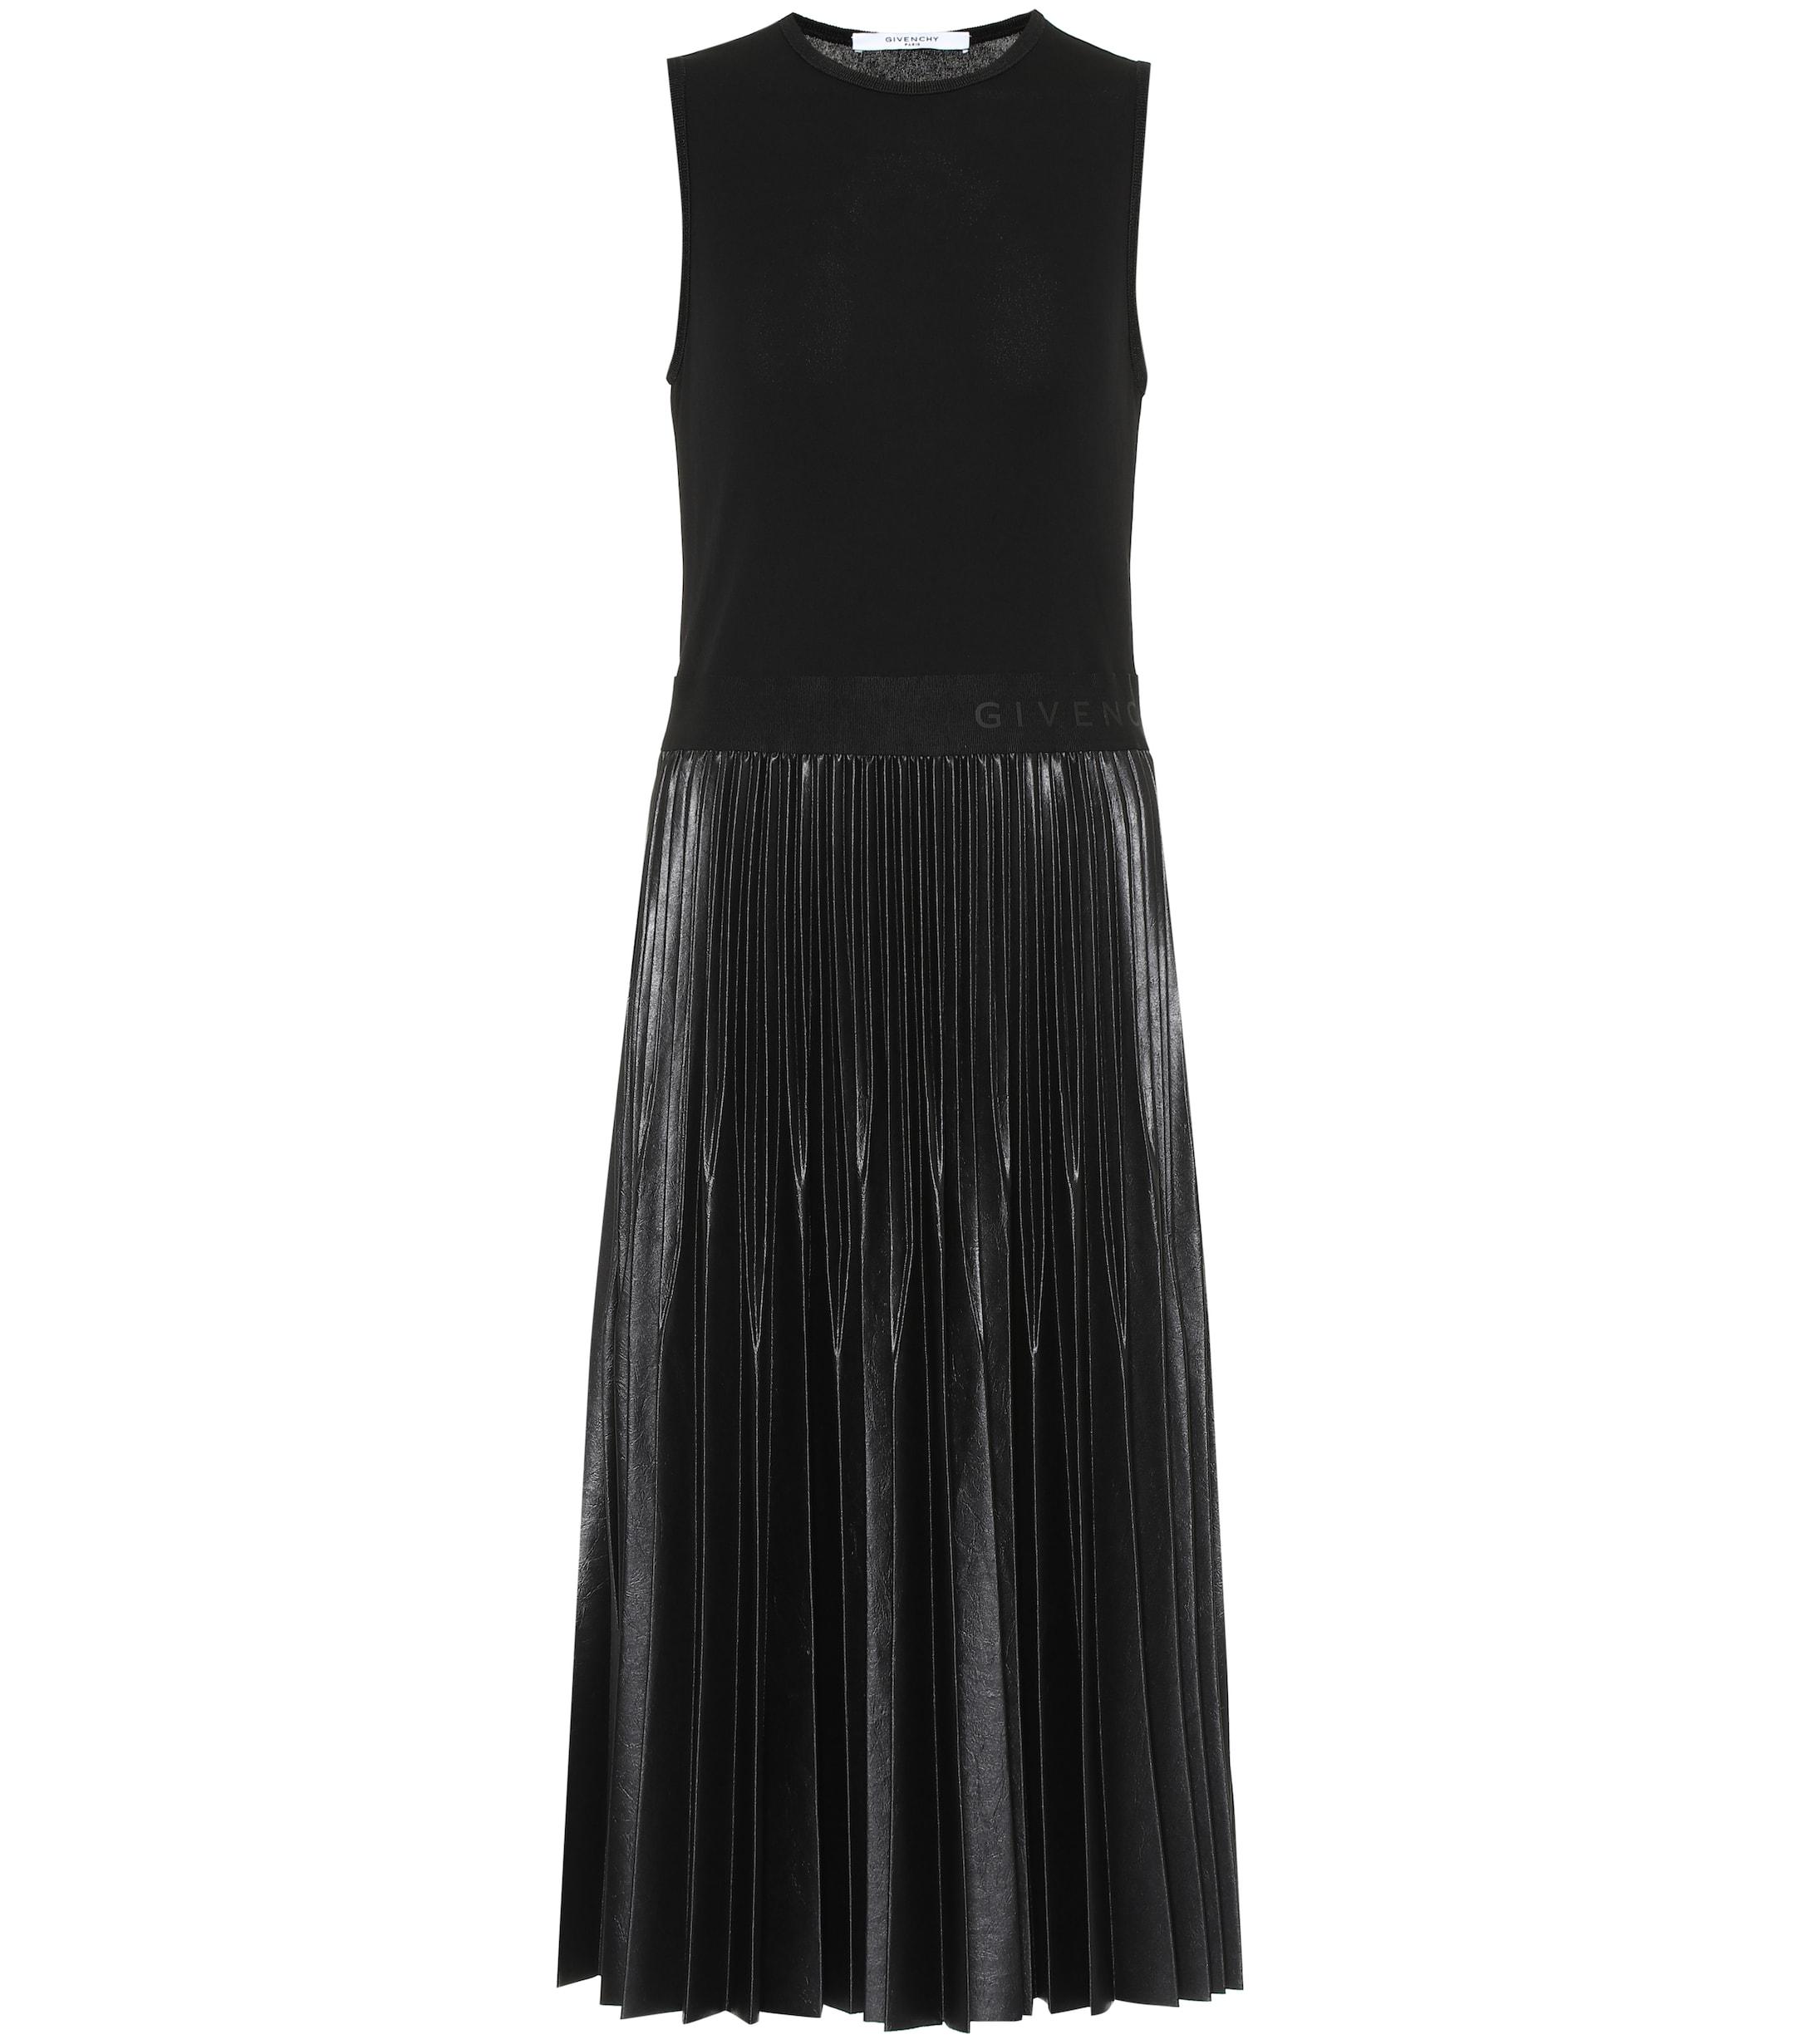 Givenchy Cotton Pleated Midi Dress in Black - Save 58% - Lyst